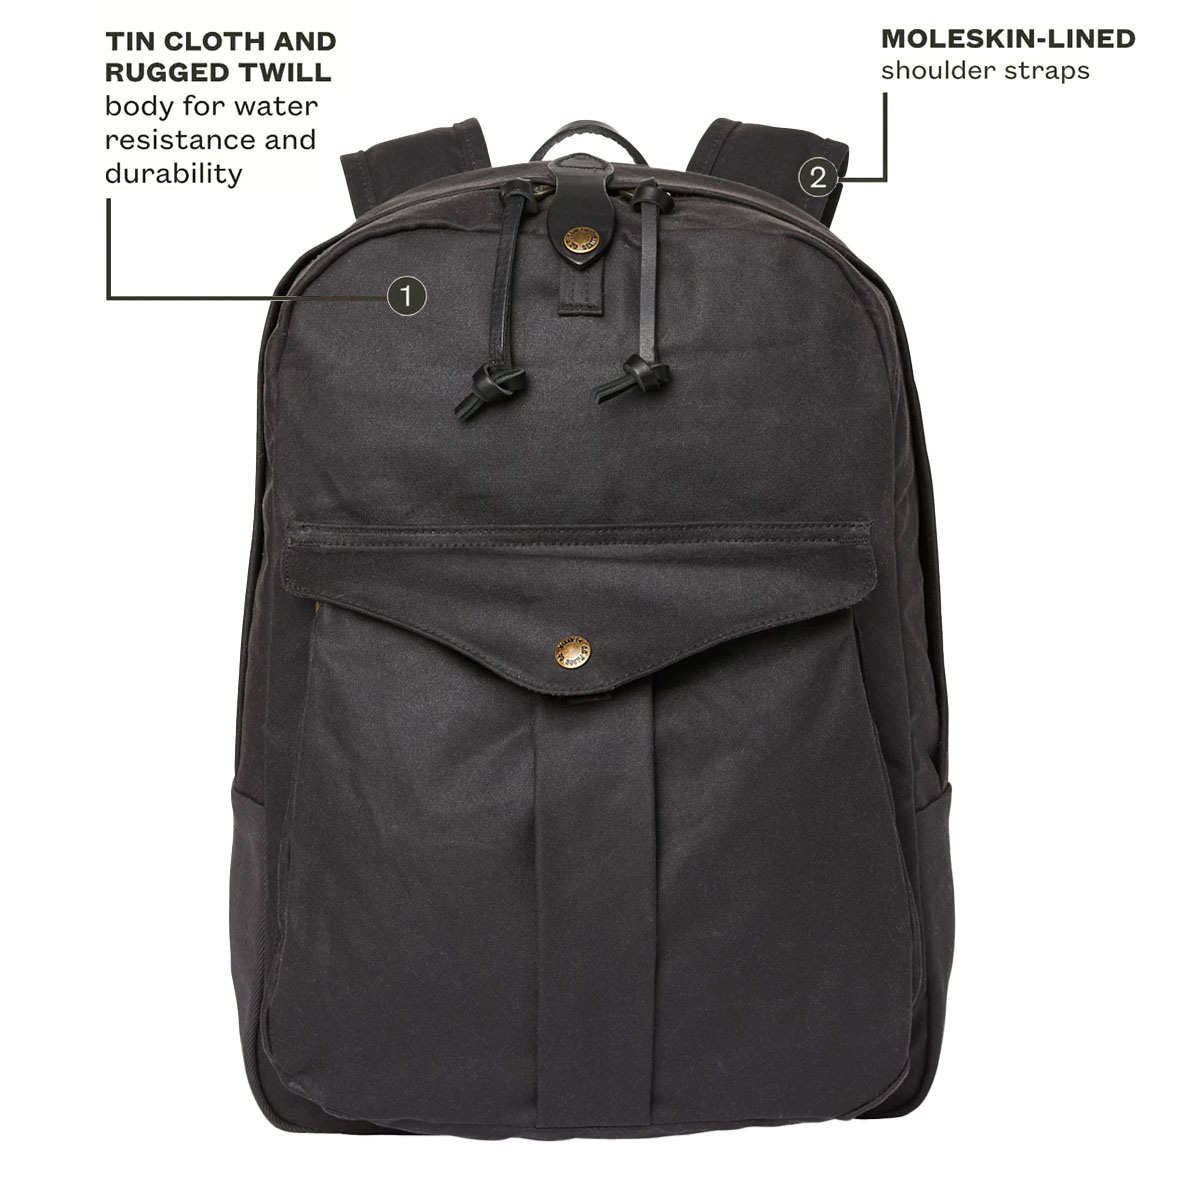 Filson Journeyman Backpack Cinder, made of Tin Cloth and Rugged Twill Canvas for waterproofing and durability